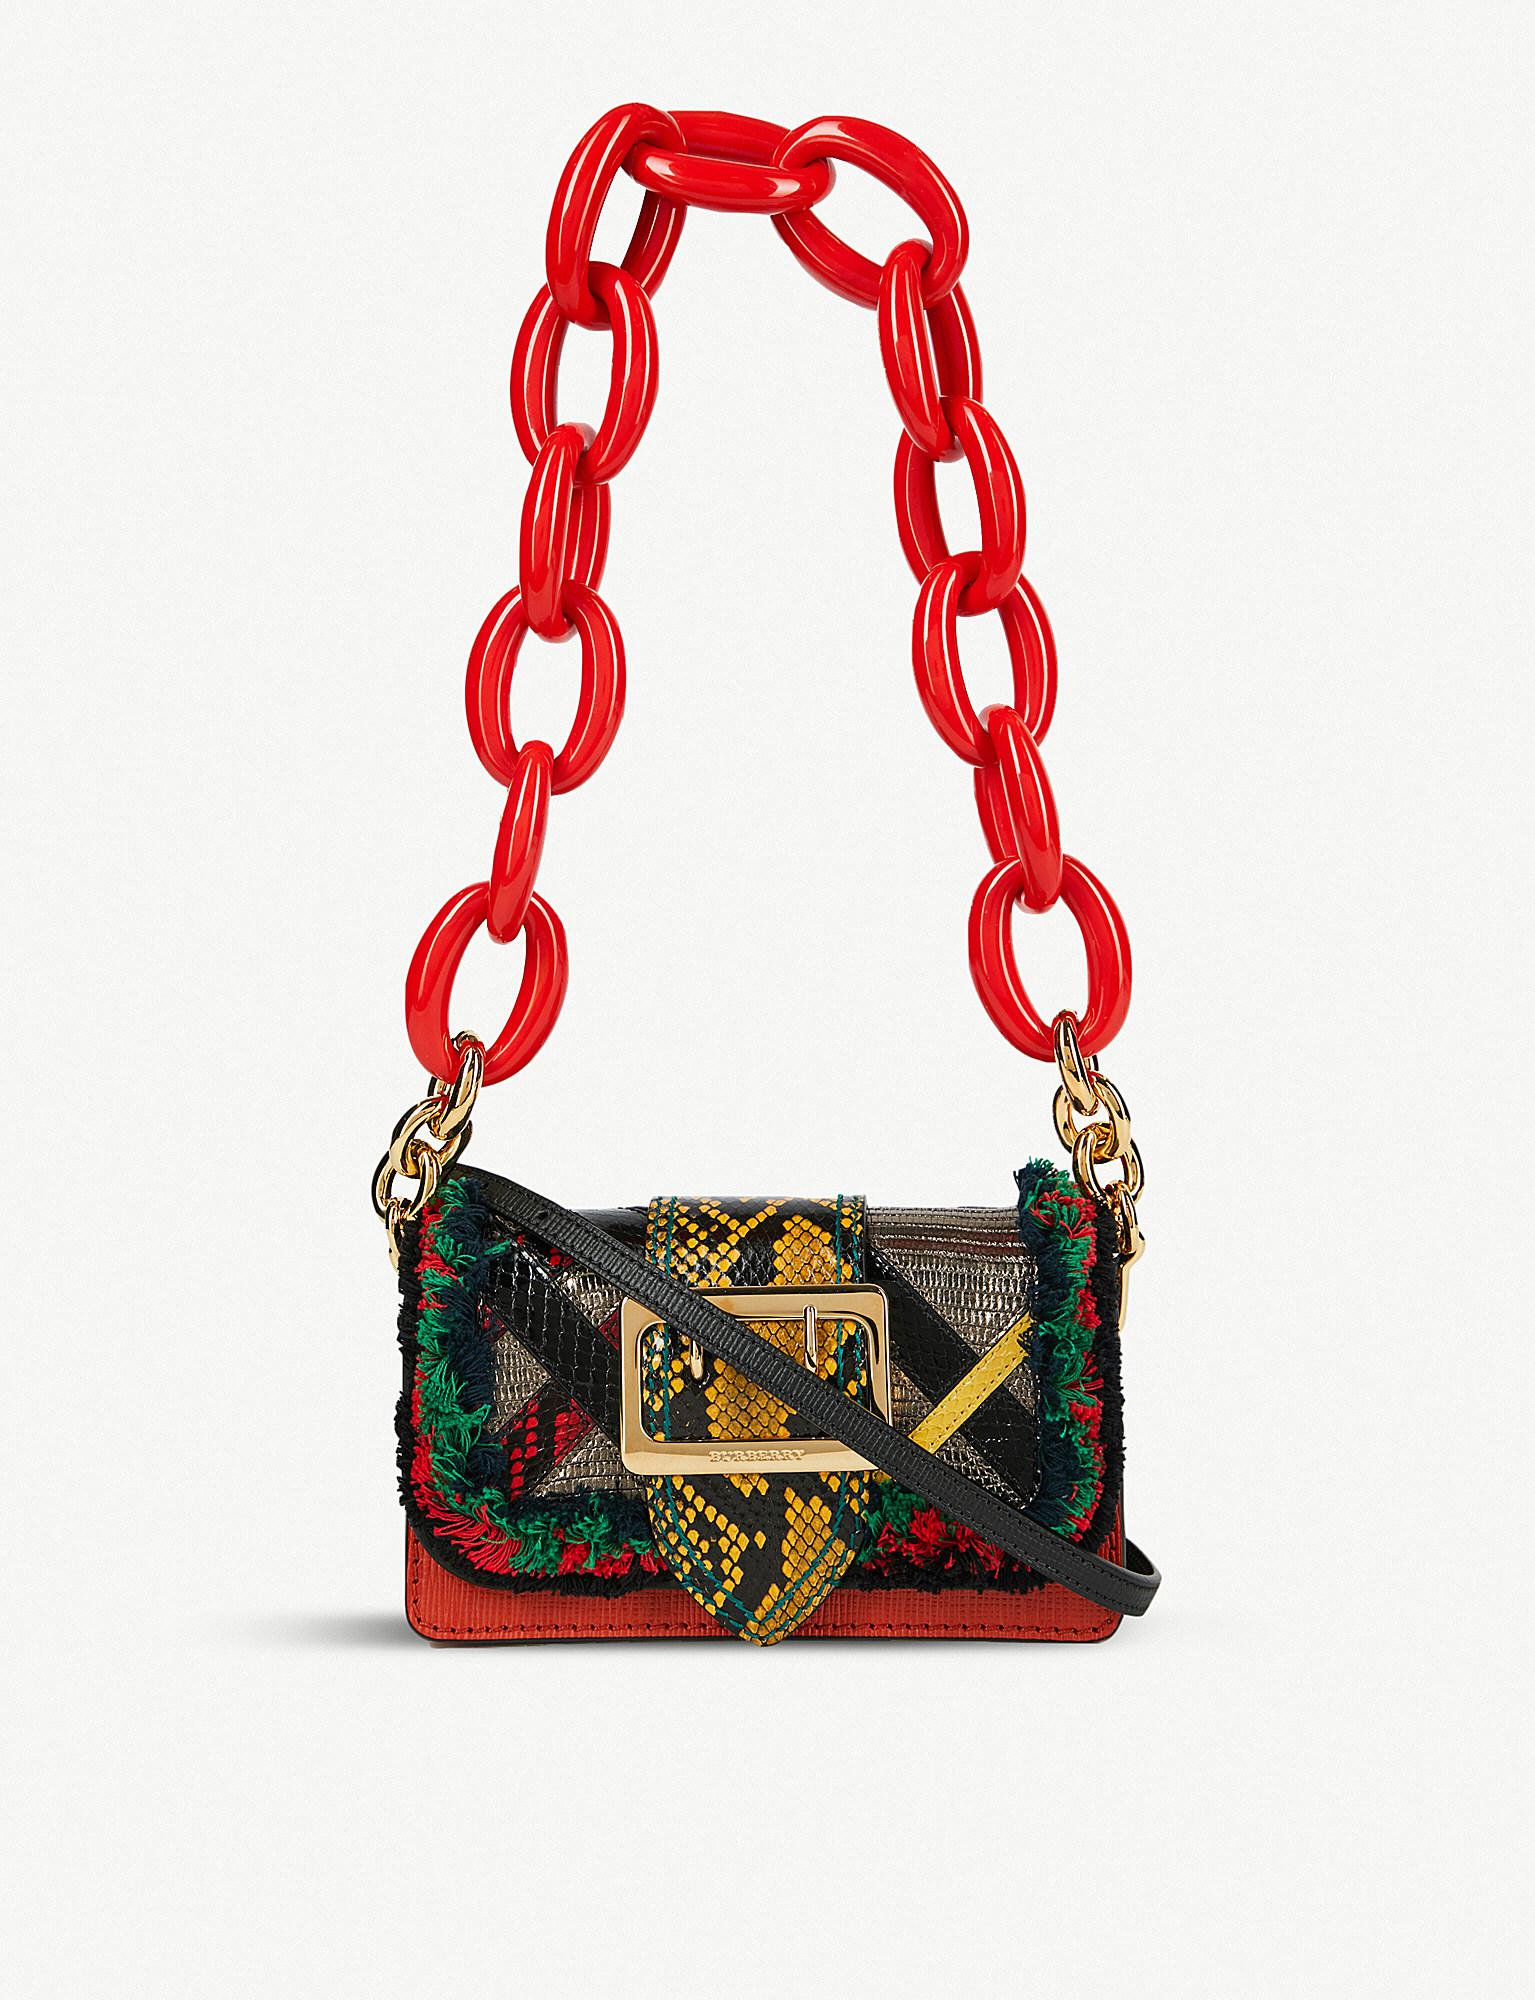 Burberry Buckle Patchwork Leather Shoulder Bag in Red | Lyst